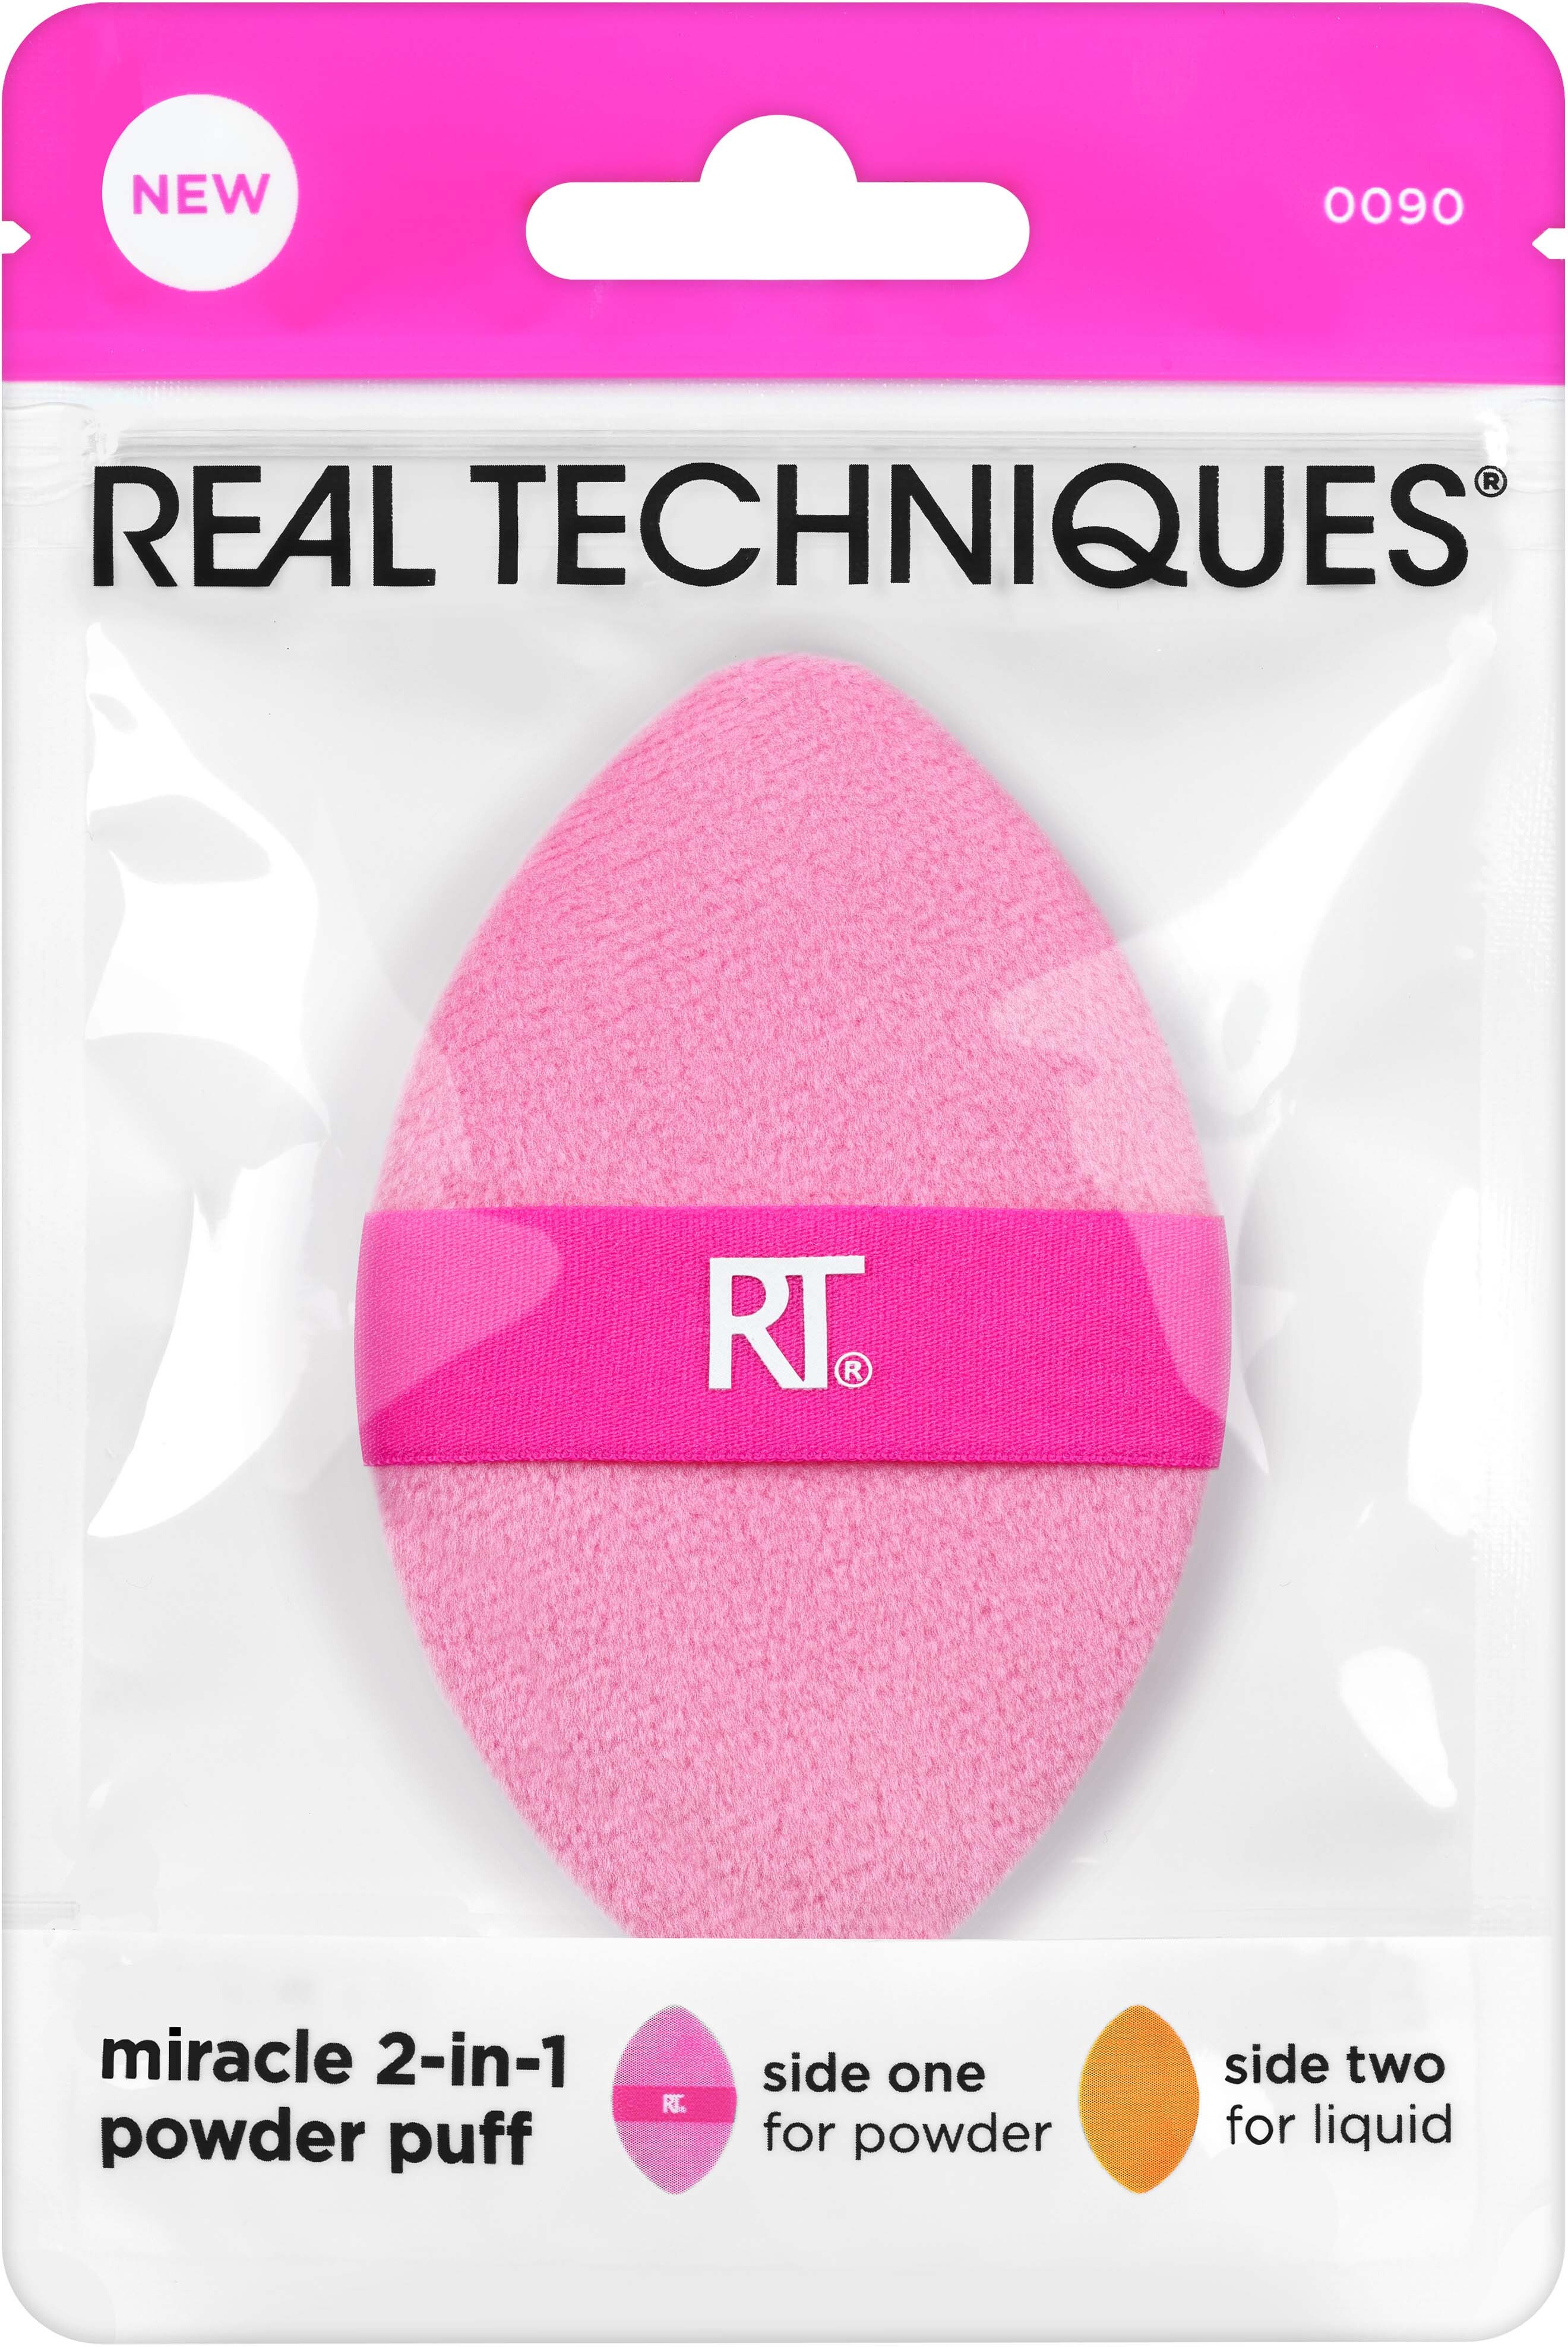 Real Techniques 6 in 1 Miracle Powder Puff